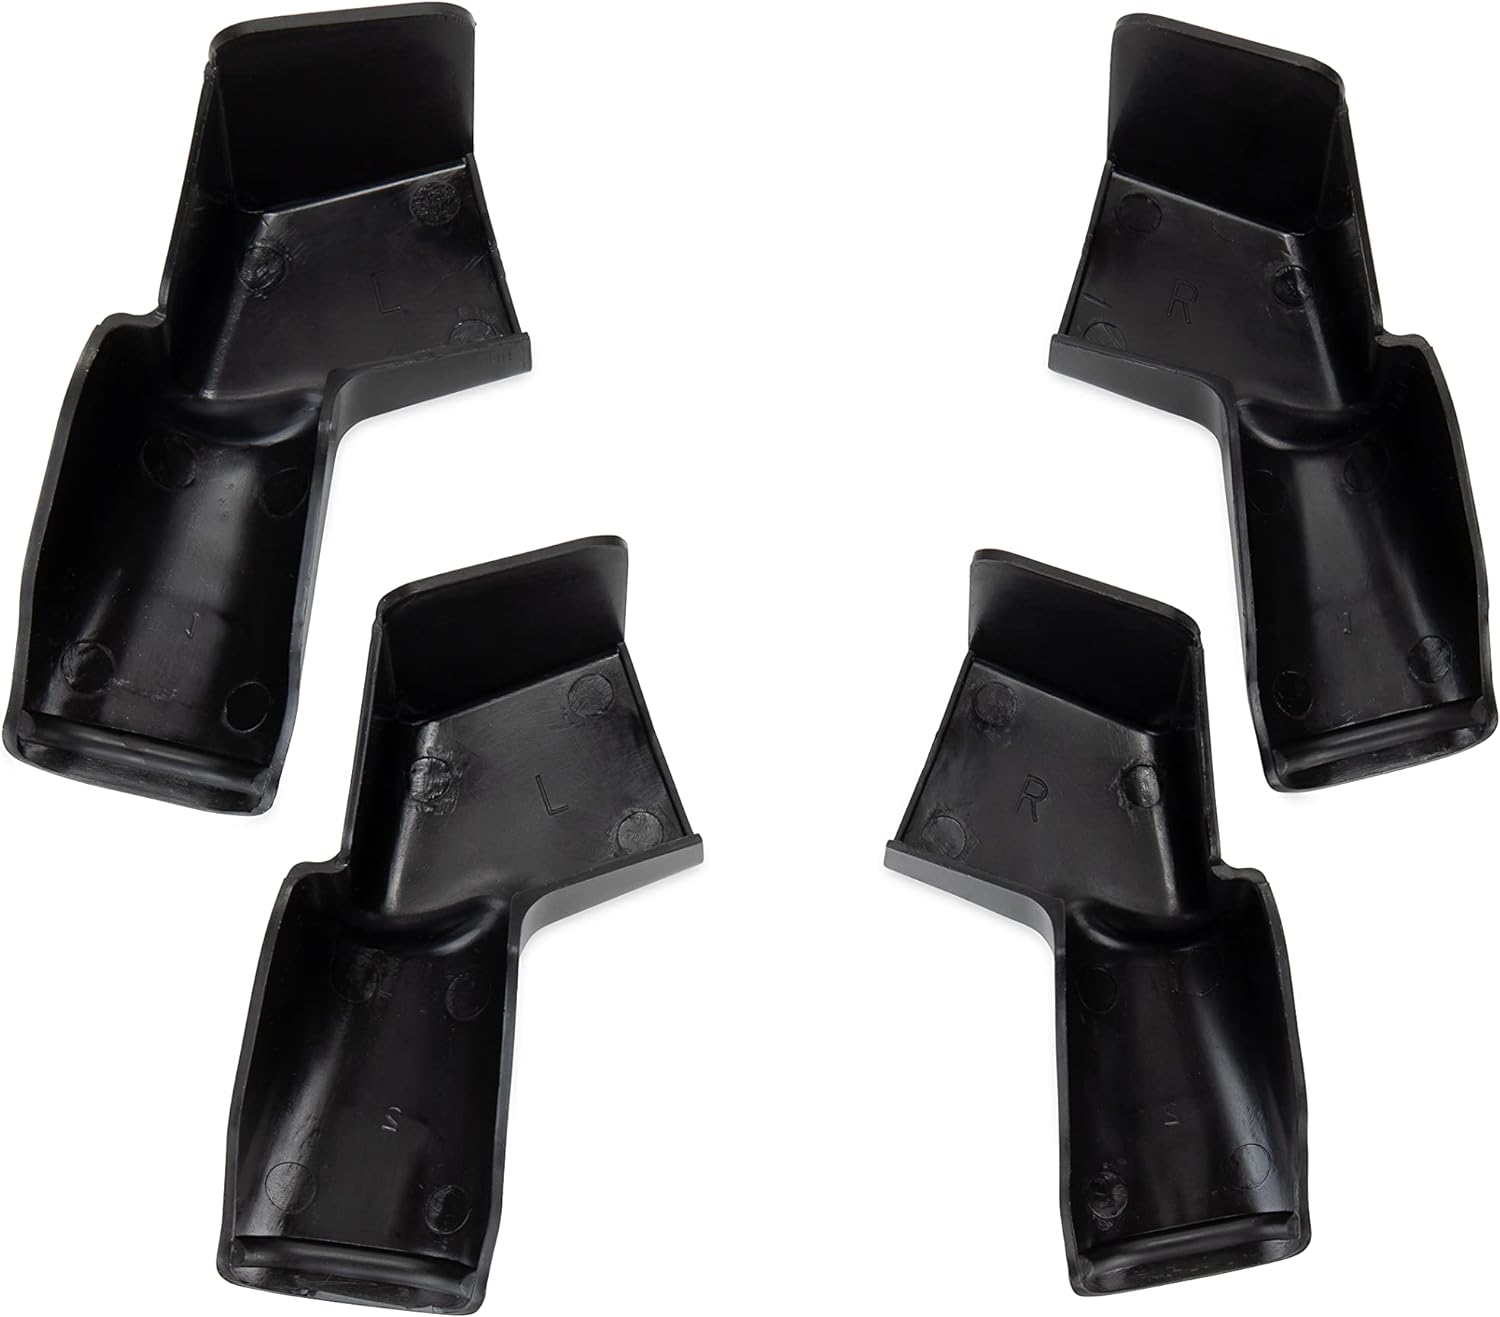 Camco 42323 Black Gutter Spouts with Extensions - 4 Pack